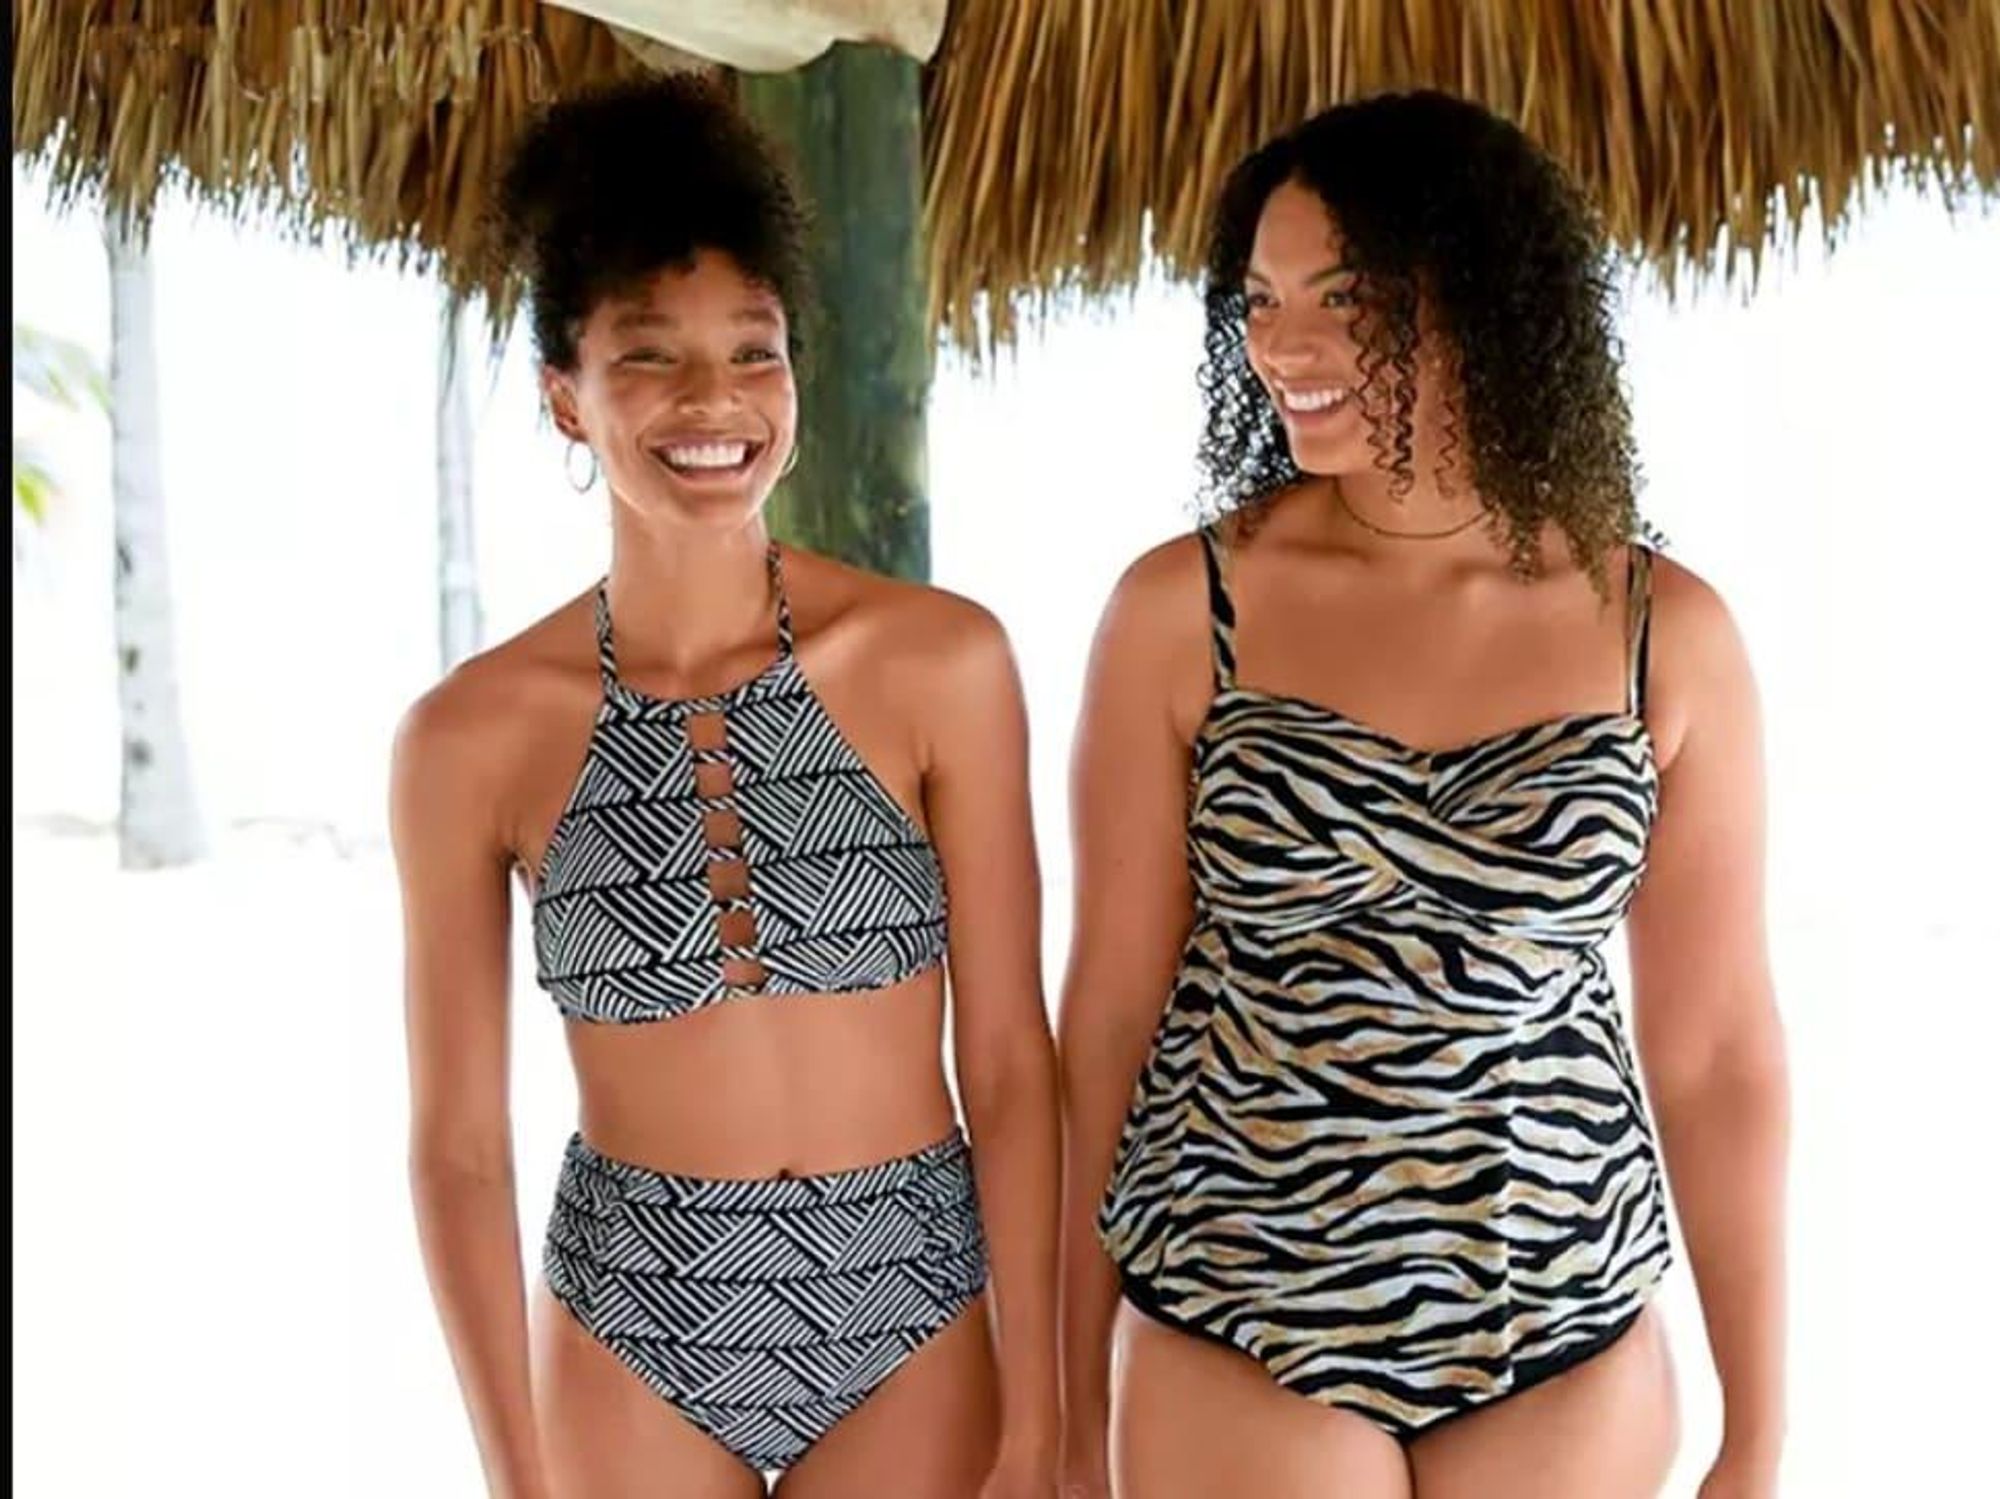 jcpenney plus size bathing suits